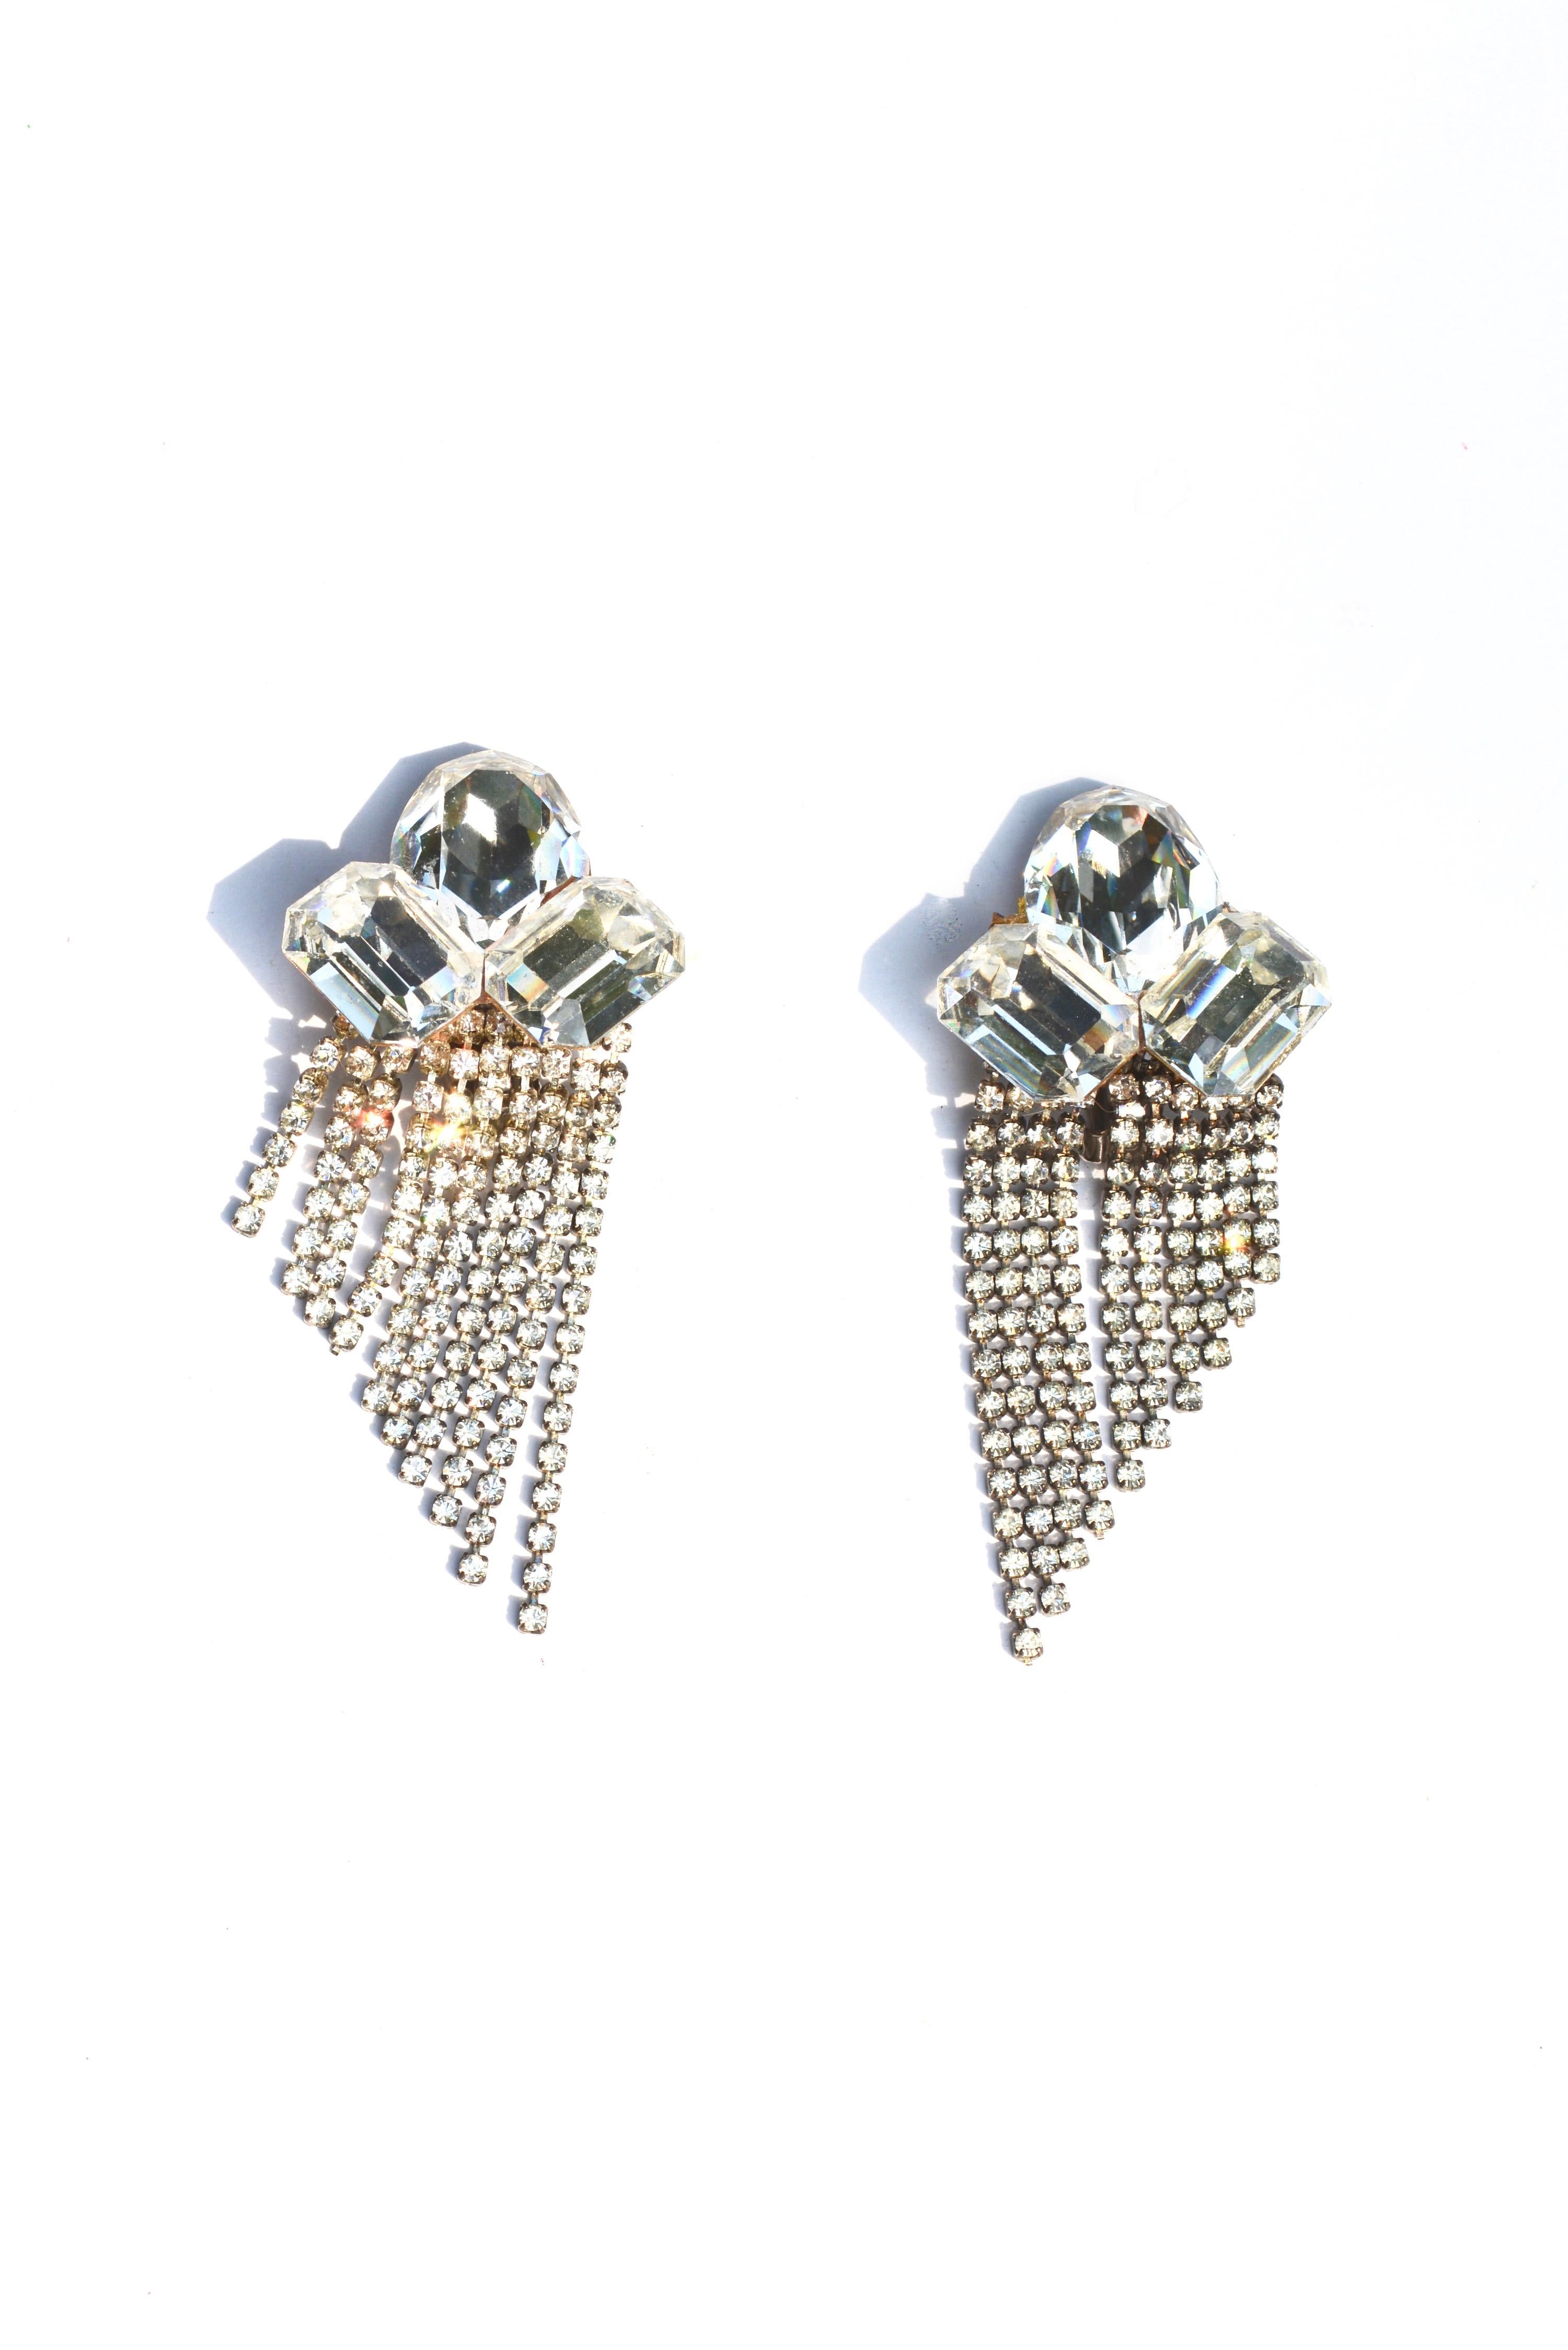 Signed 1980s rhinestone earrings with lovely detailing in the fringe and stones.  About 4